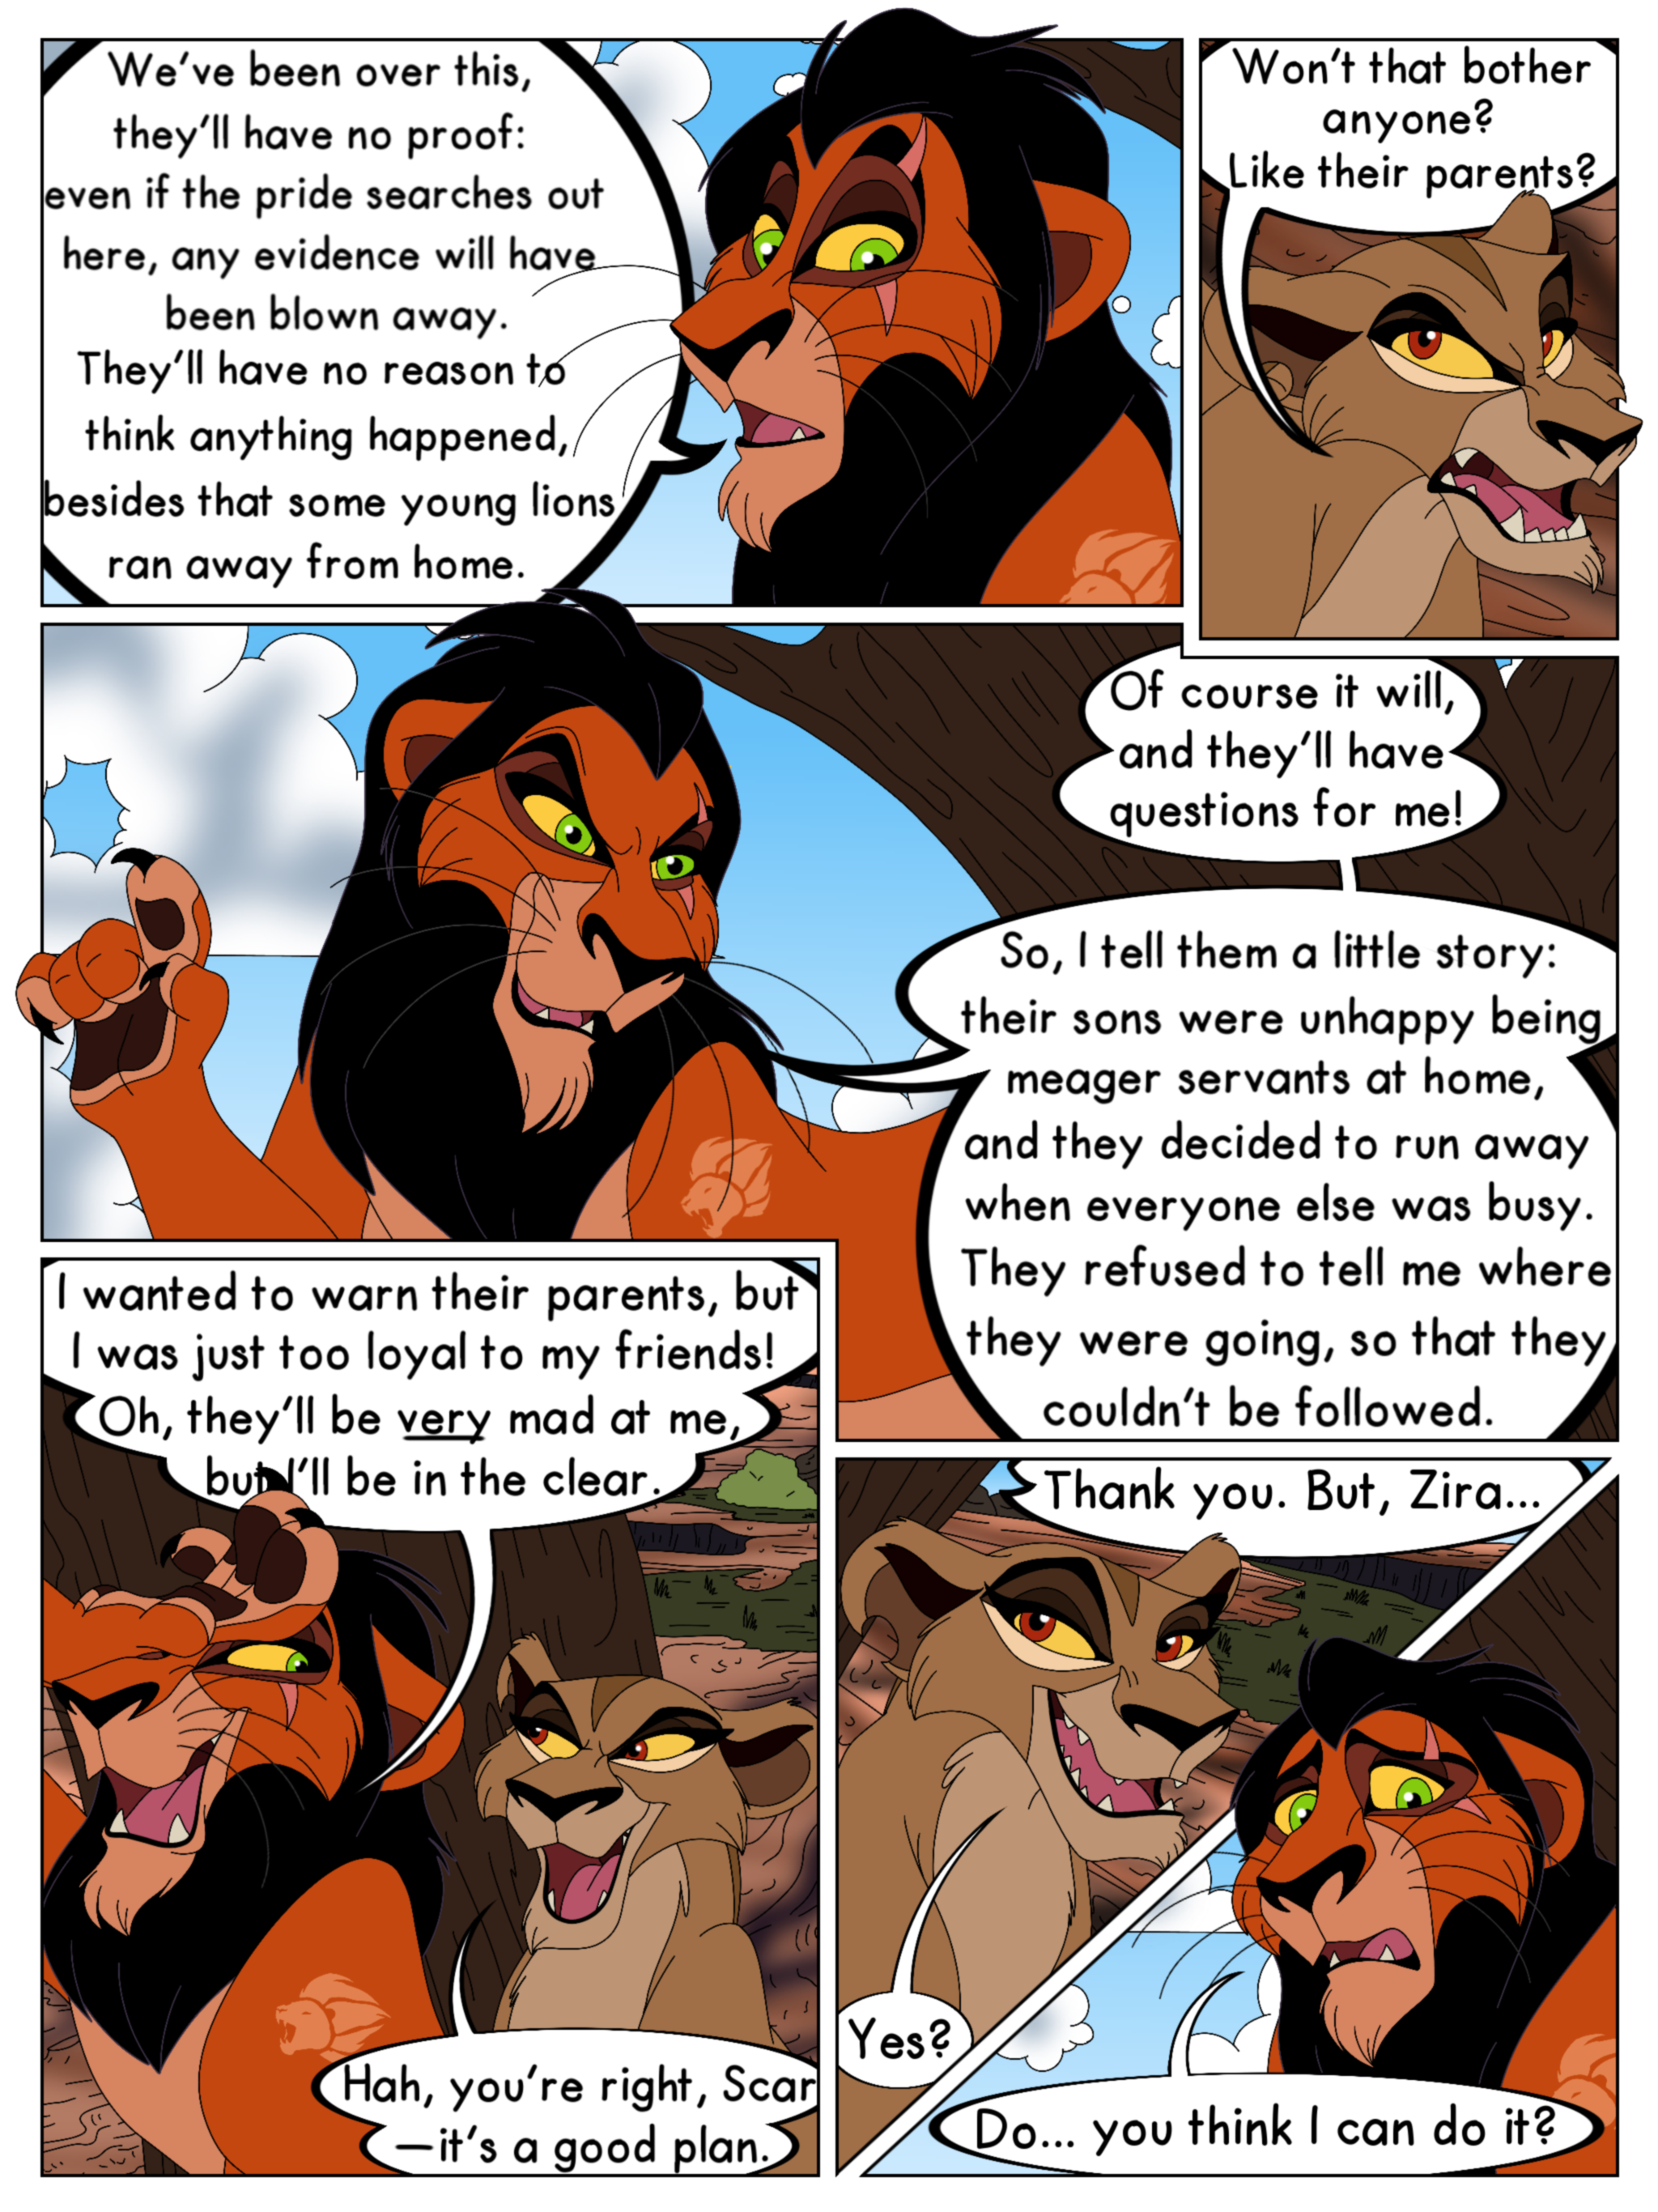 Remission ineffektiv Forskudssalg Anything to Win: Ch6 Pg7 by Percy-McMurphy on DeviantArt